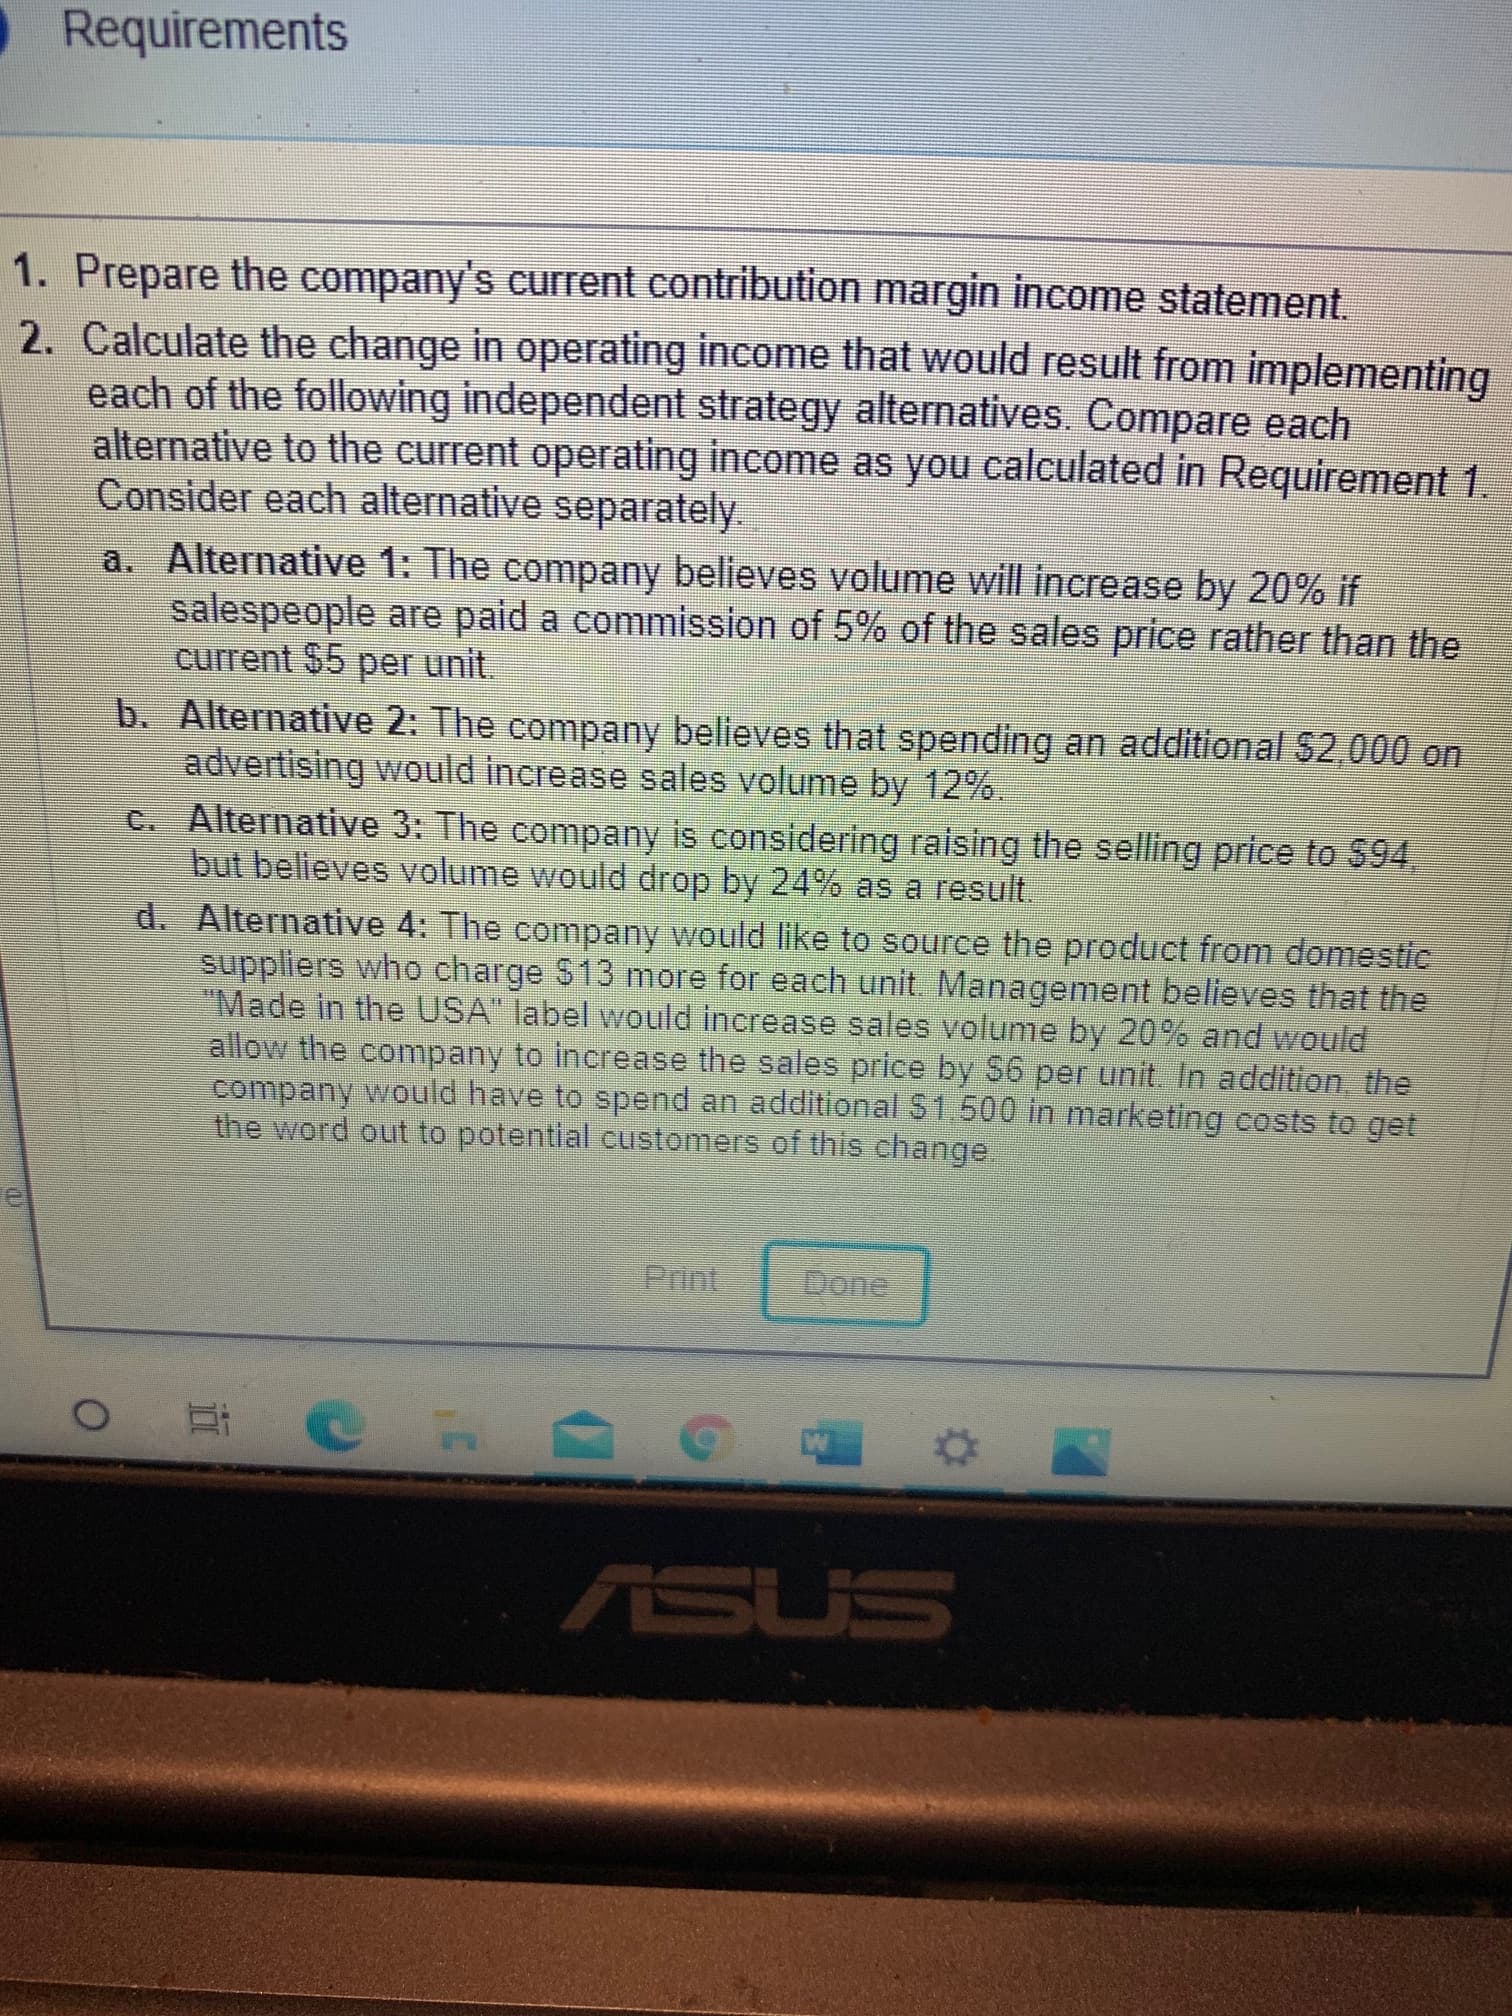 1. Prepare the company's current contribution margin income statement.
2. Calculate the change in operating income that would result from implementing
each of the following independent strategy alternatives. Compare each
alternative to the current operating income as you calculated in Requirement 1.
Consider each alternative separately.
a. Alternative 1: The company believes volume will increase by 20% if
salespeople are paid a commission of 5% of the sales price rather than the
current $5 per unit.
b. Alternative 2: The company believes that spending an additional $2,000 on
advertising would increase sales volume by 12%.
C. Alternative 3: The company is considering raising the selling price to $94
but believes volume would drop by 24% as a result.
d. Alternative 4: The company would like to source the product from domestic
suppliers who charge S13 more for each unit. Management believes that the
"Made in the USA" label would increase sales volume by 20% and would
allow the company to increase the sales price by $6 per unit. In addition, the
company would have to spend an additional $1.500 in marketing costs to get
the word out to potential customers of this change.
